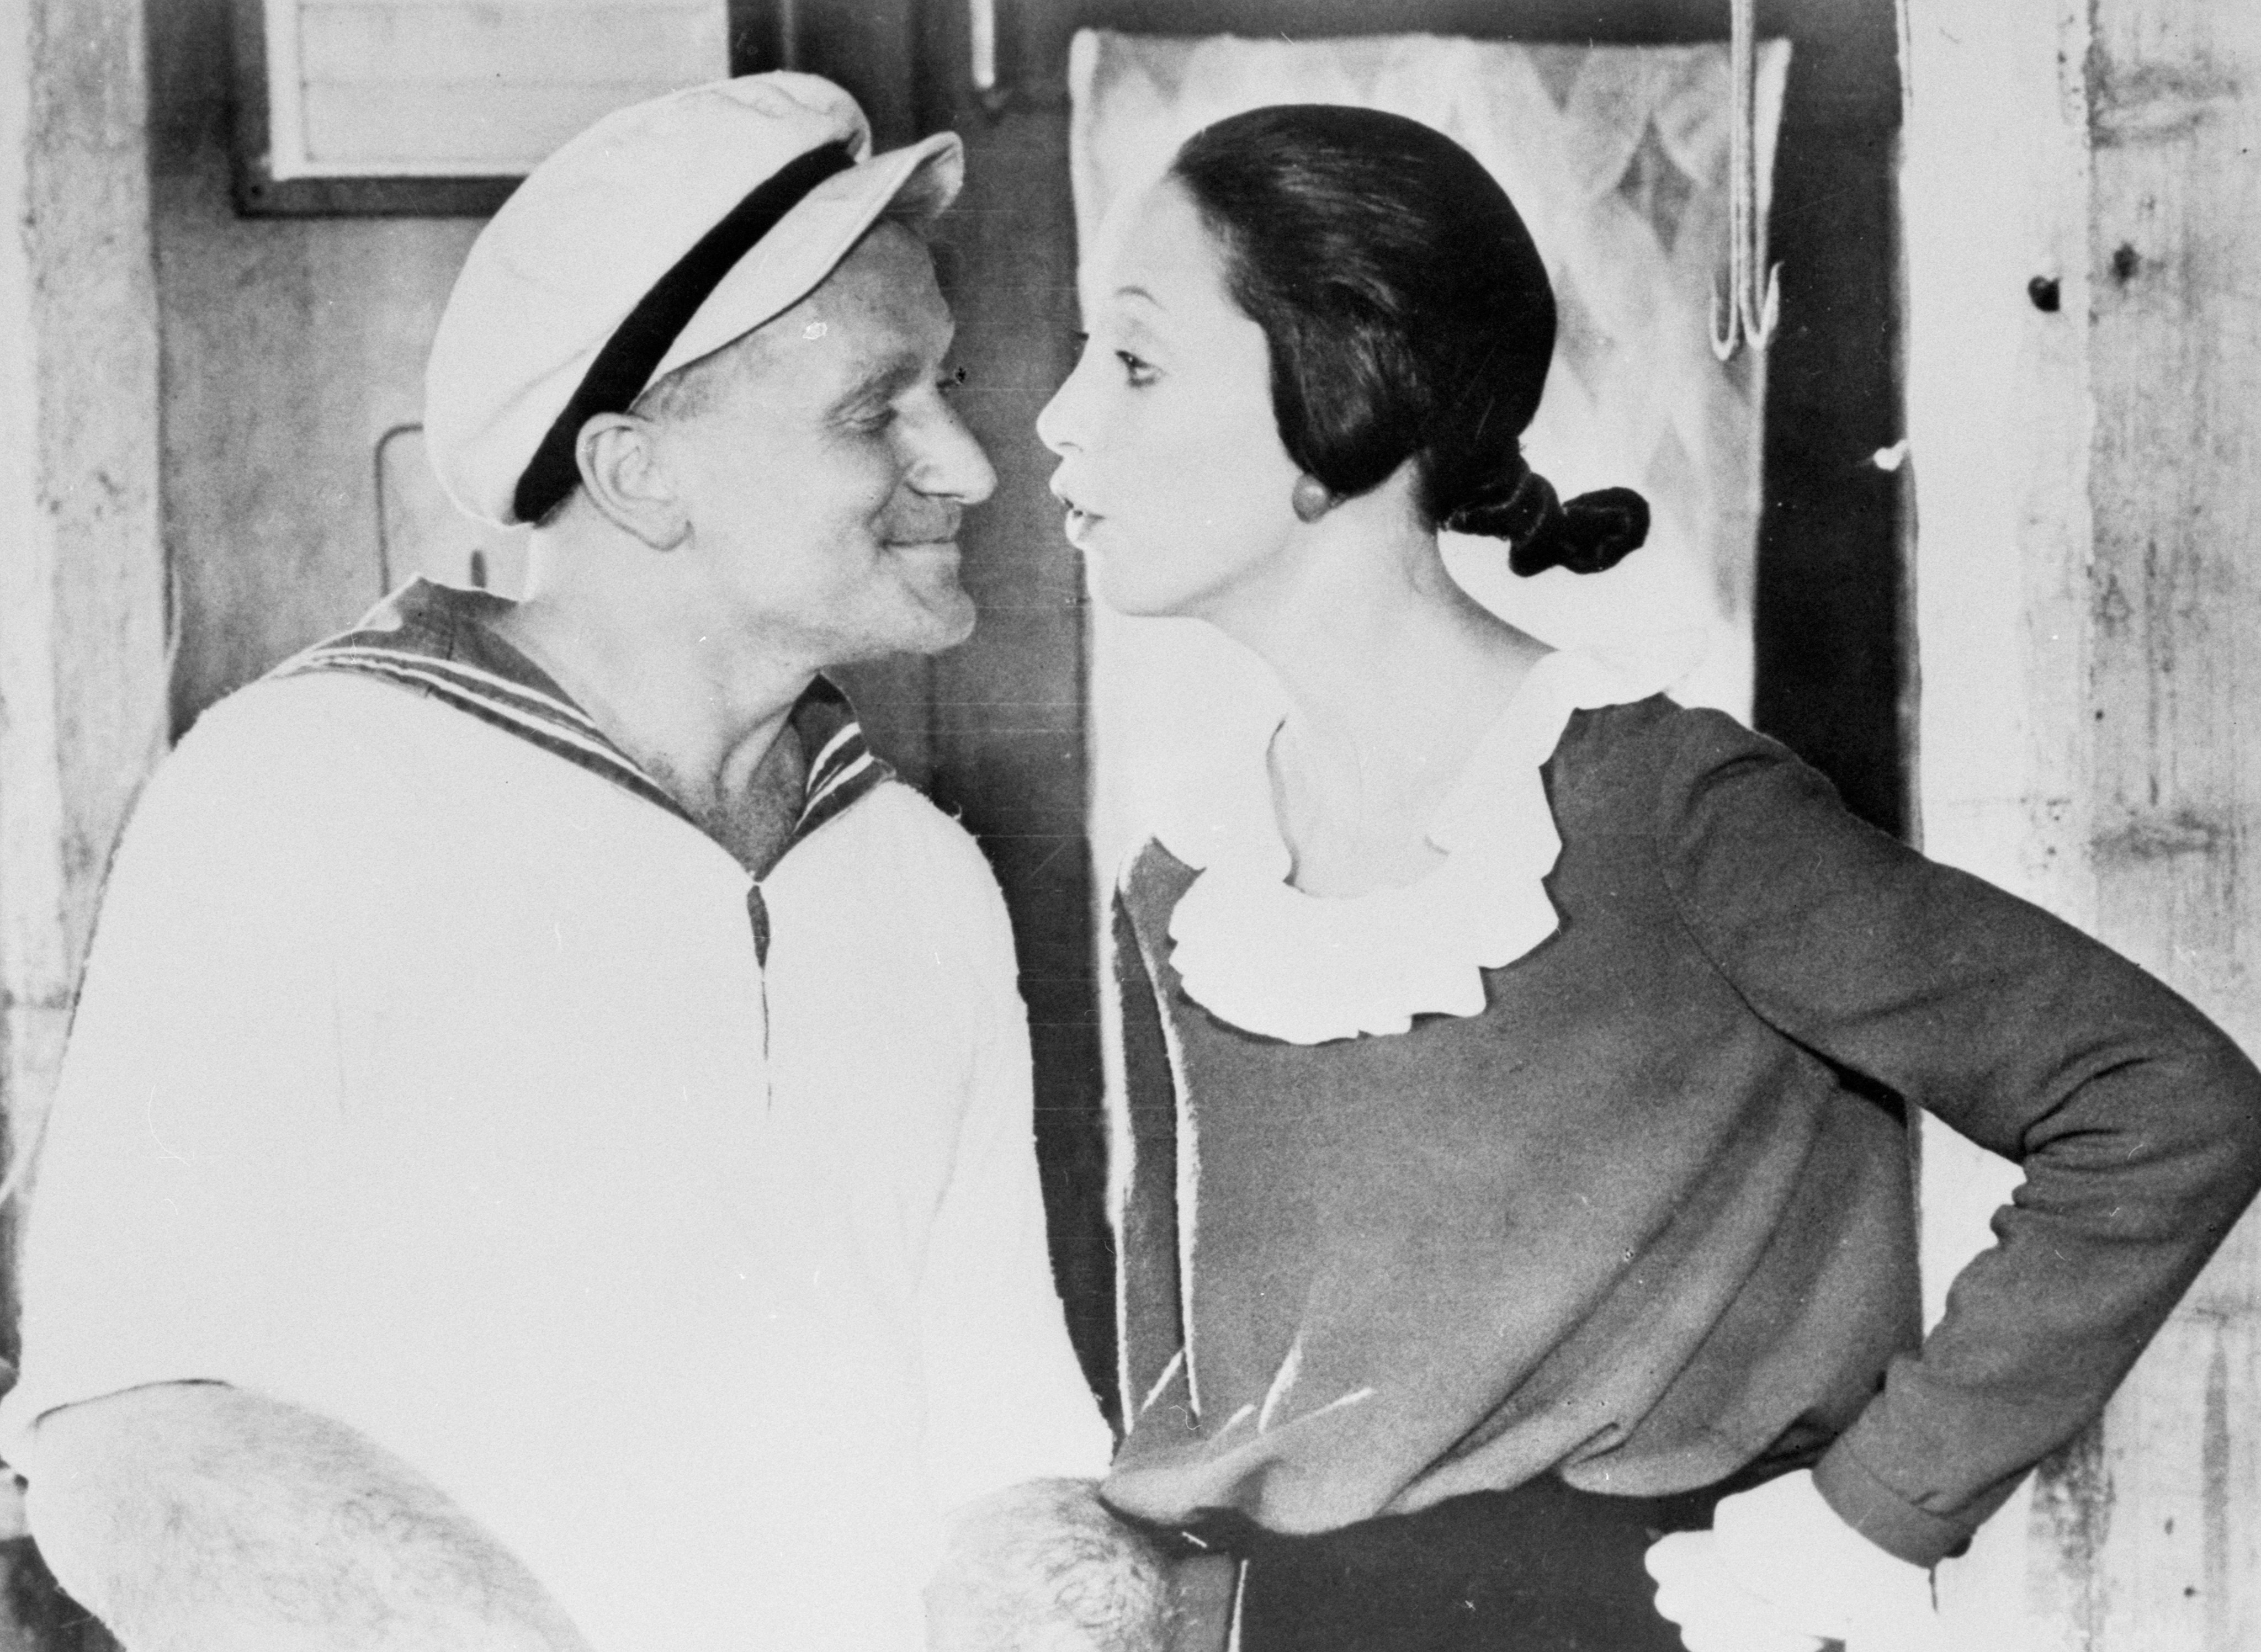 Comedy actor Robin Williams, as Popeye, and Shelley Duvall as Olive Oyl in the movie "Popeye" | Source: Getty Images